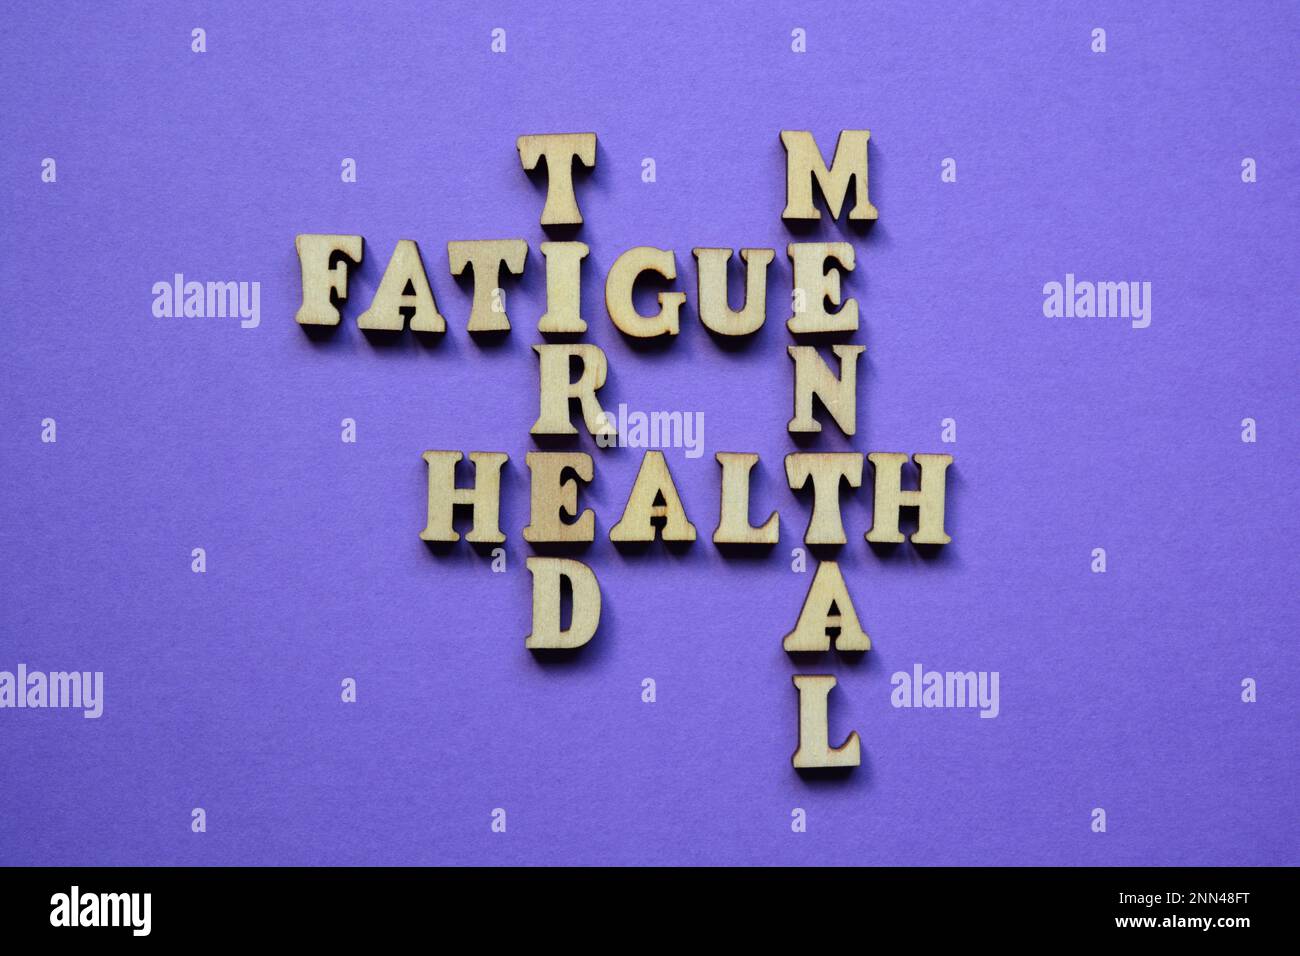 Mental, Health, Tired, Fatigue, words in wooden alphabet letters in crossword form isolated on purple background Stock Photo